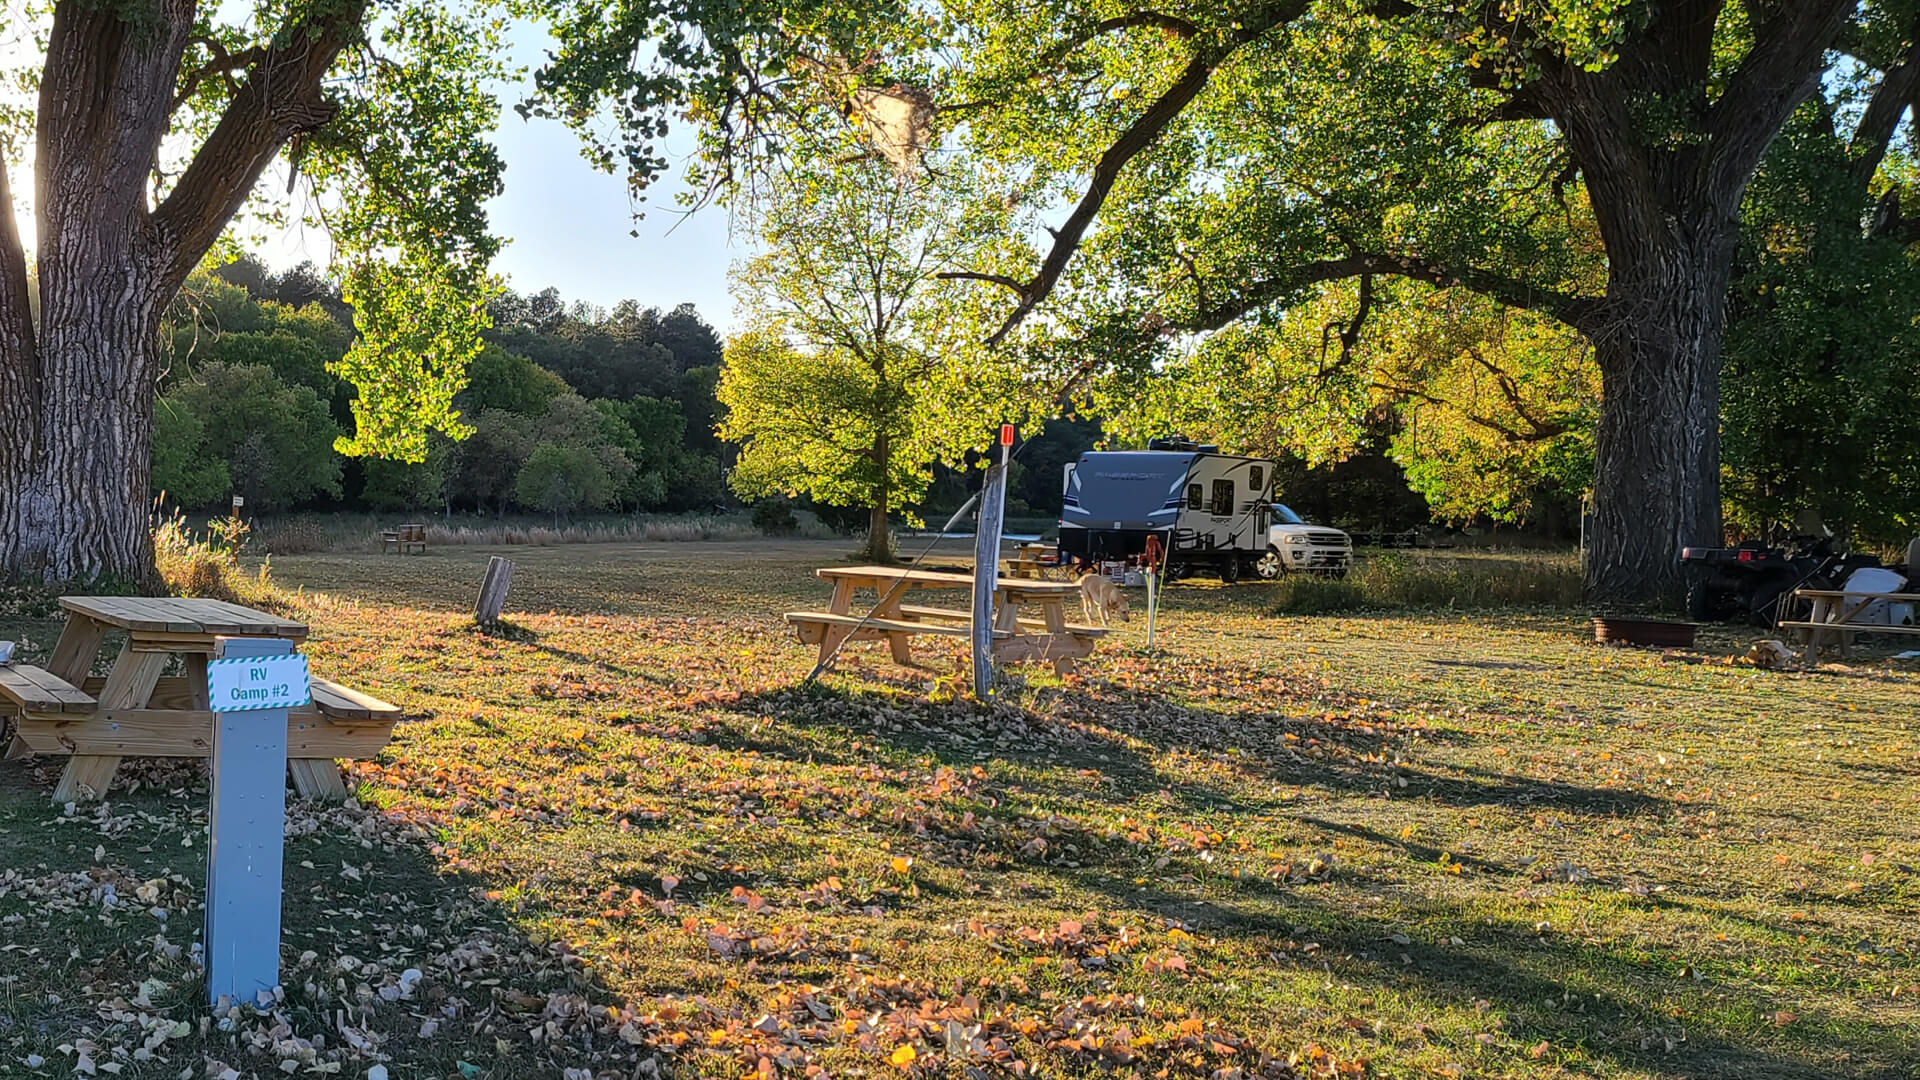 Open Camp Spot near the Niobrara River with camper in the background